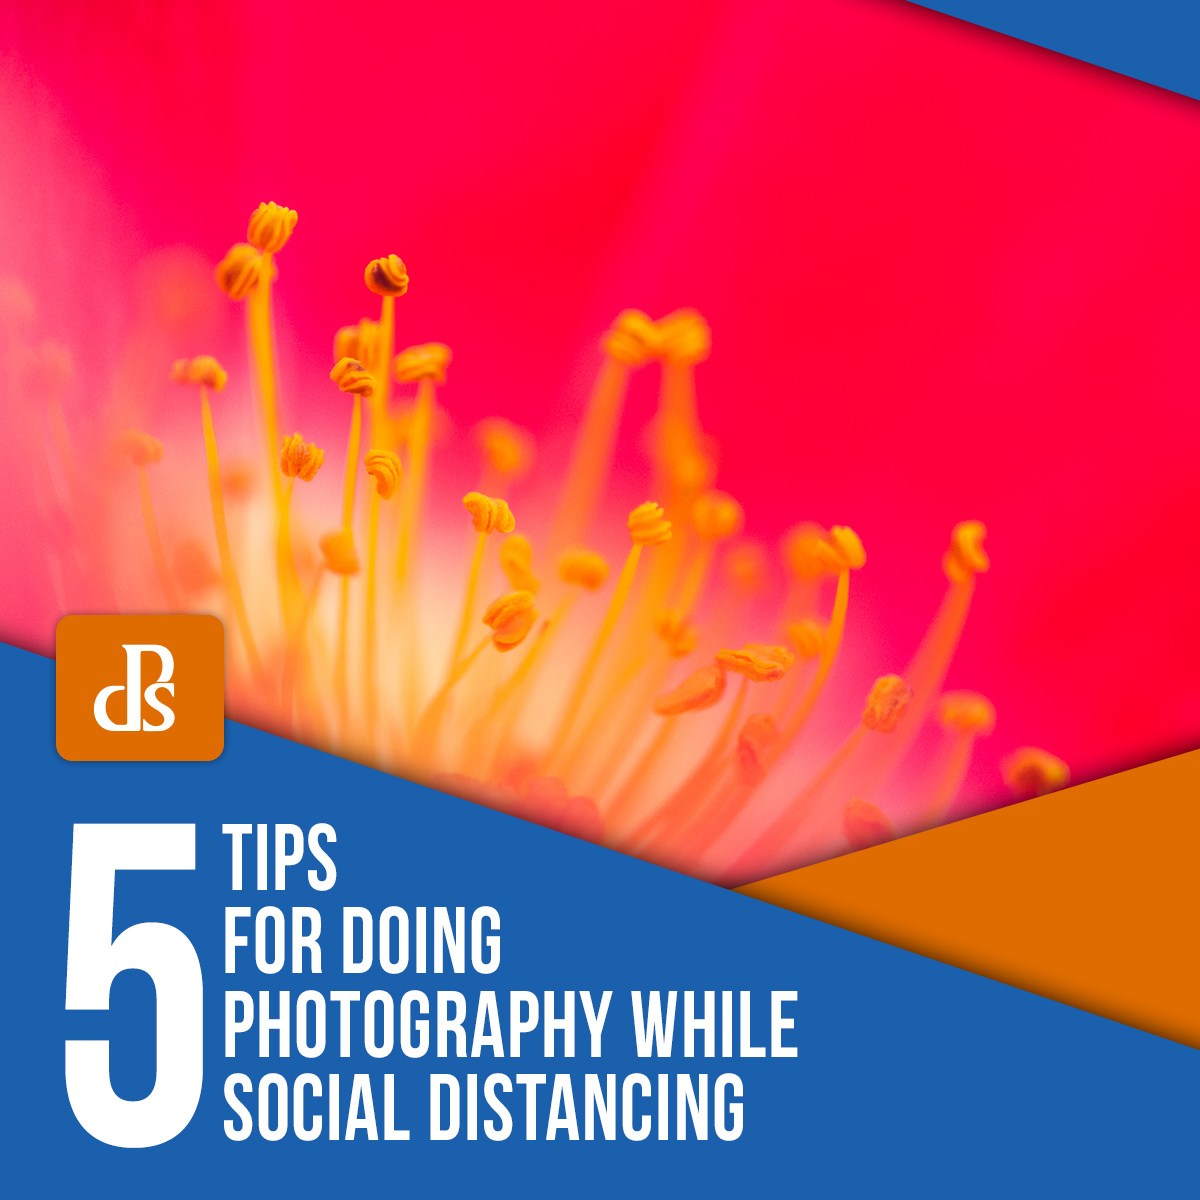 The post 5 Tips for Doing Photography While Social Distancing appeared first on Digital Photography School